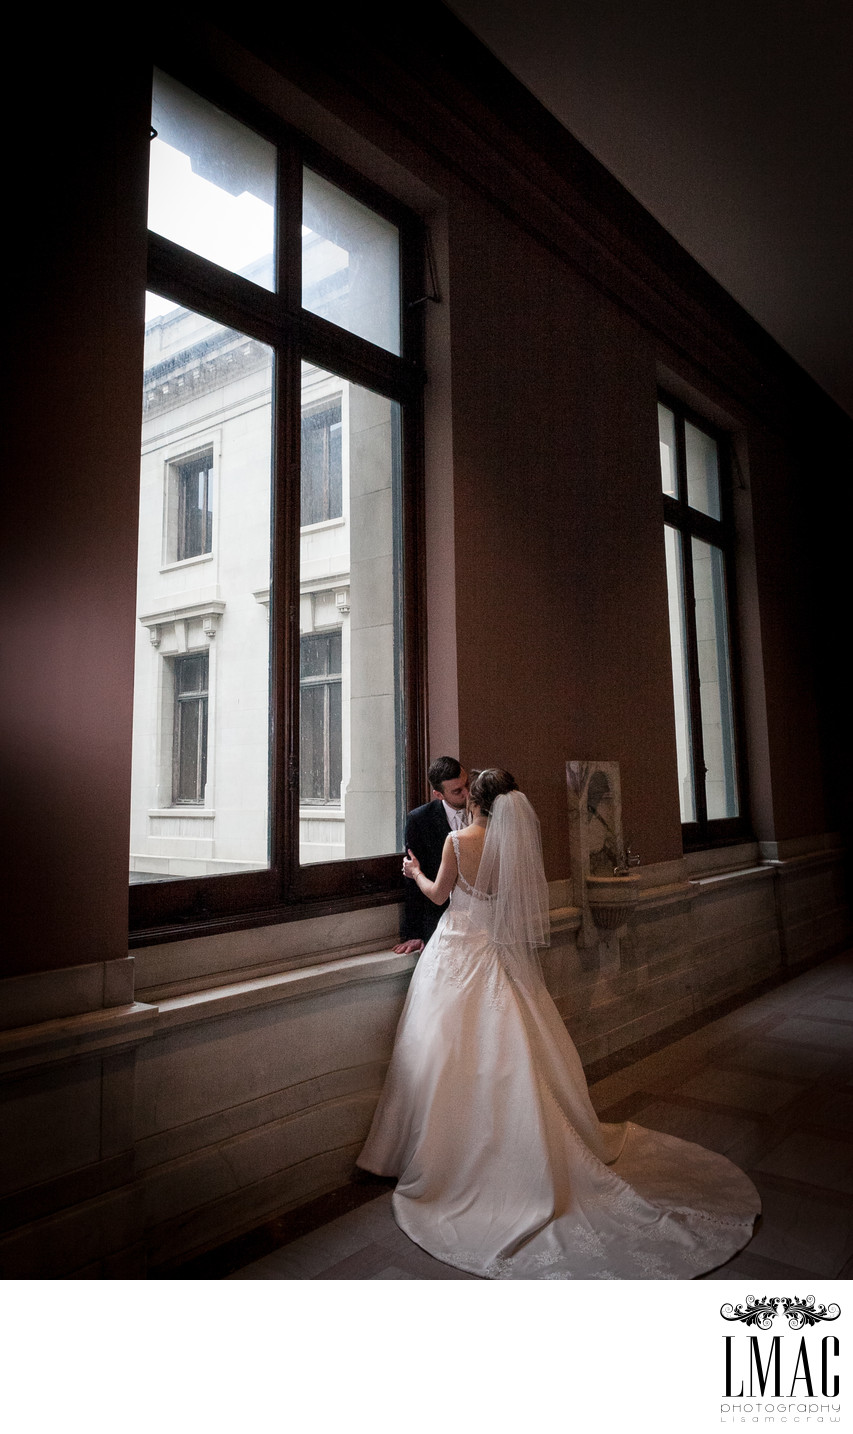 Stunning Wedding Photos from the Cleveland Courthouse